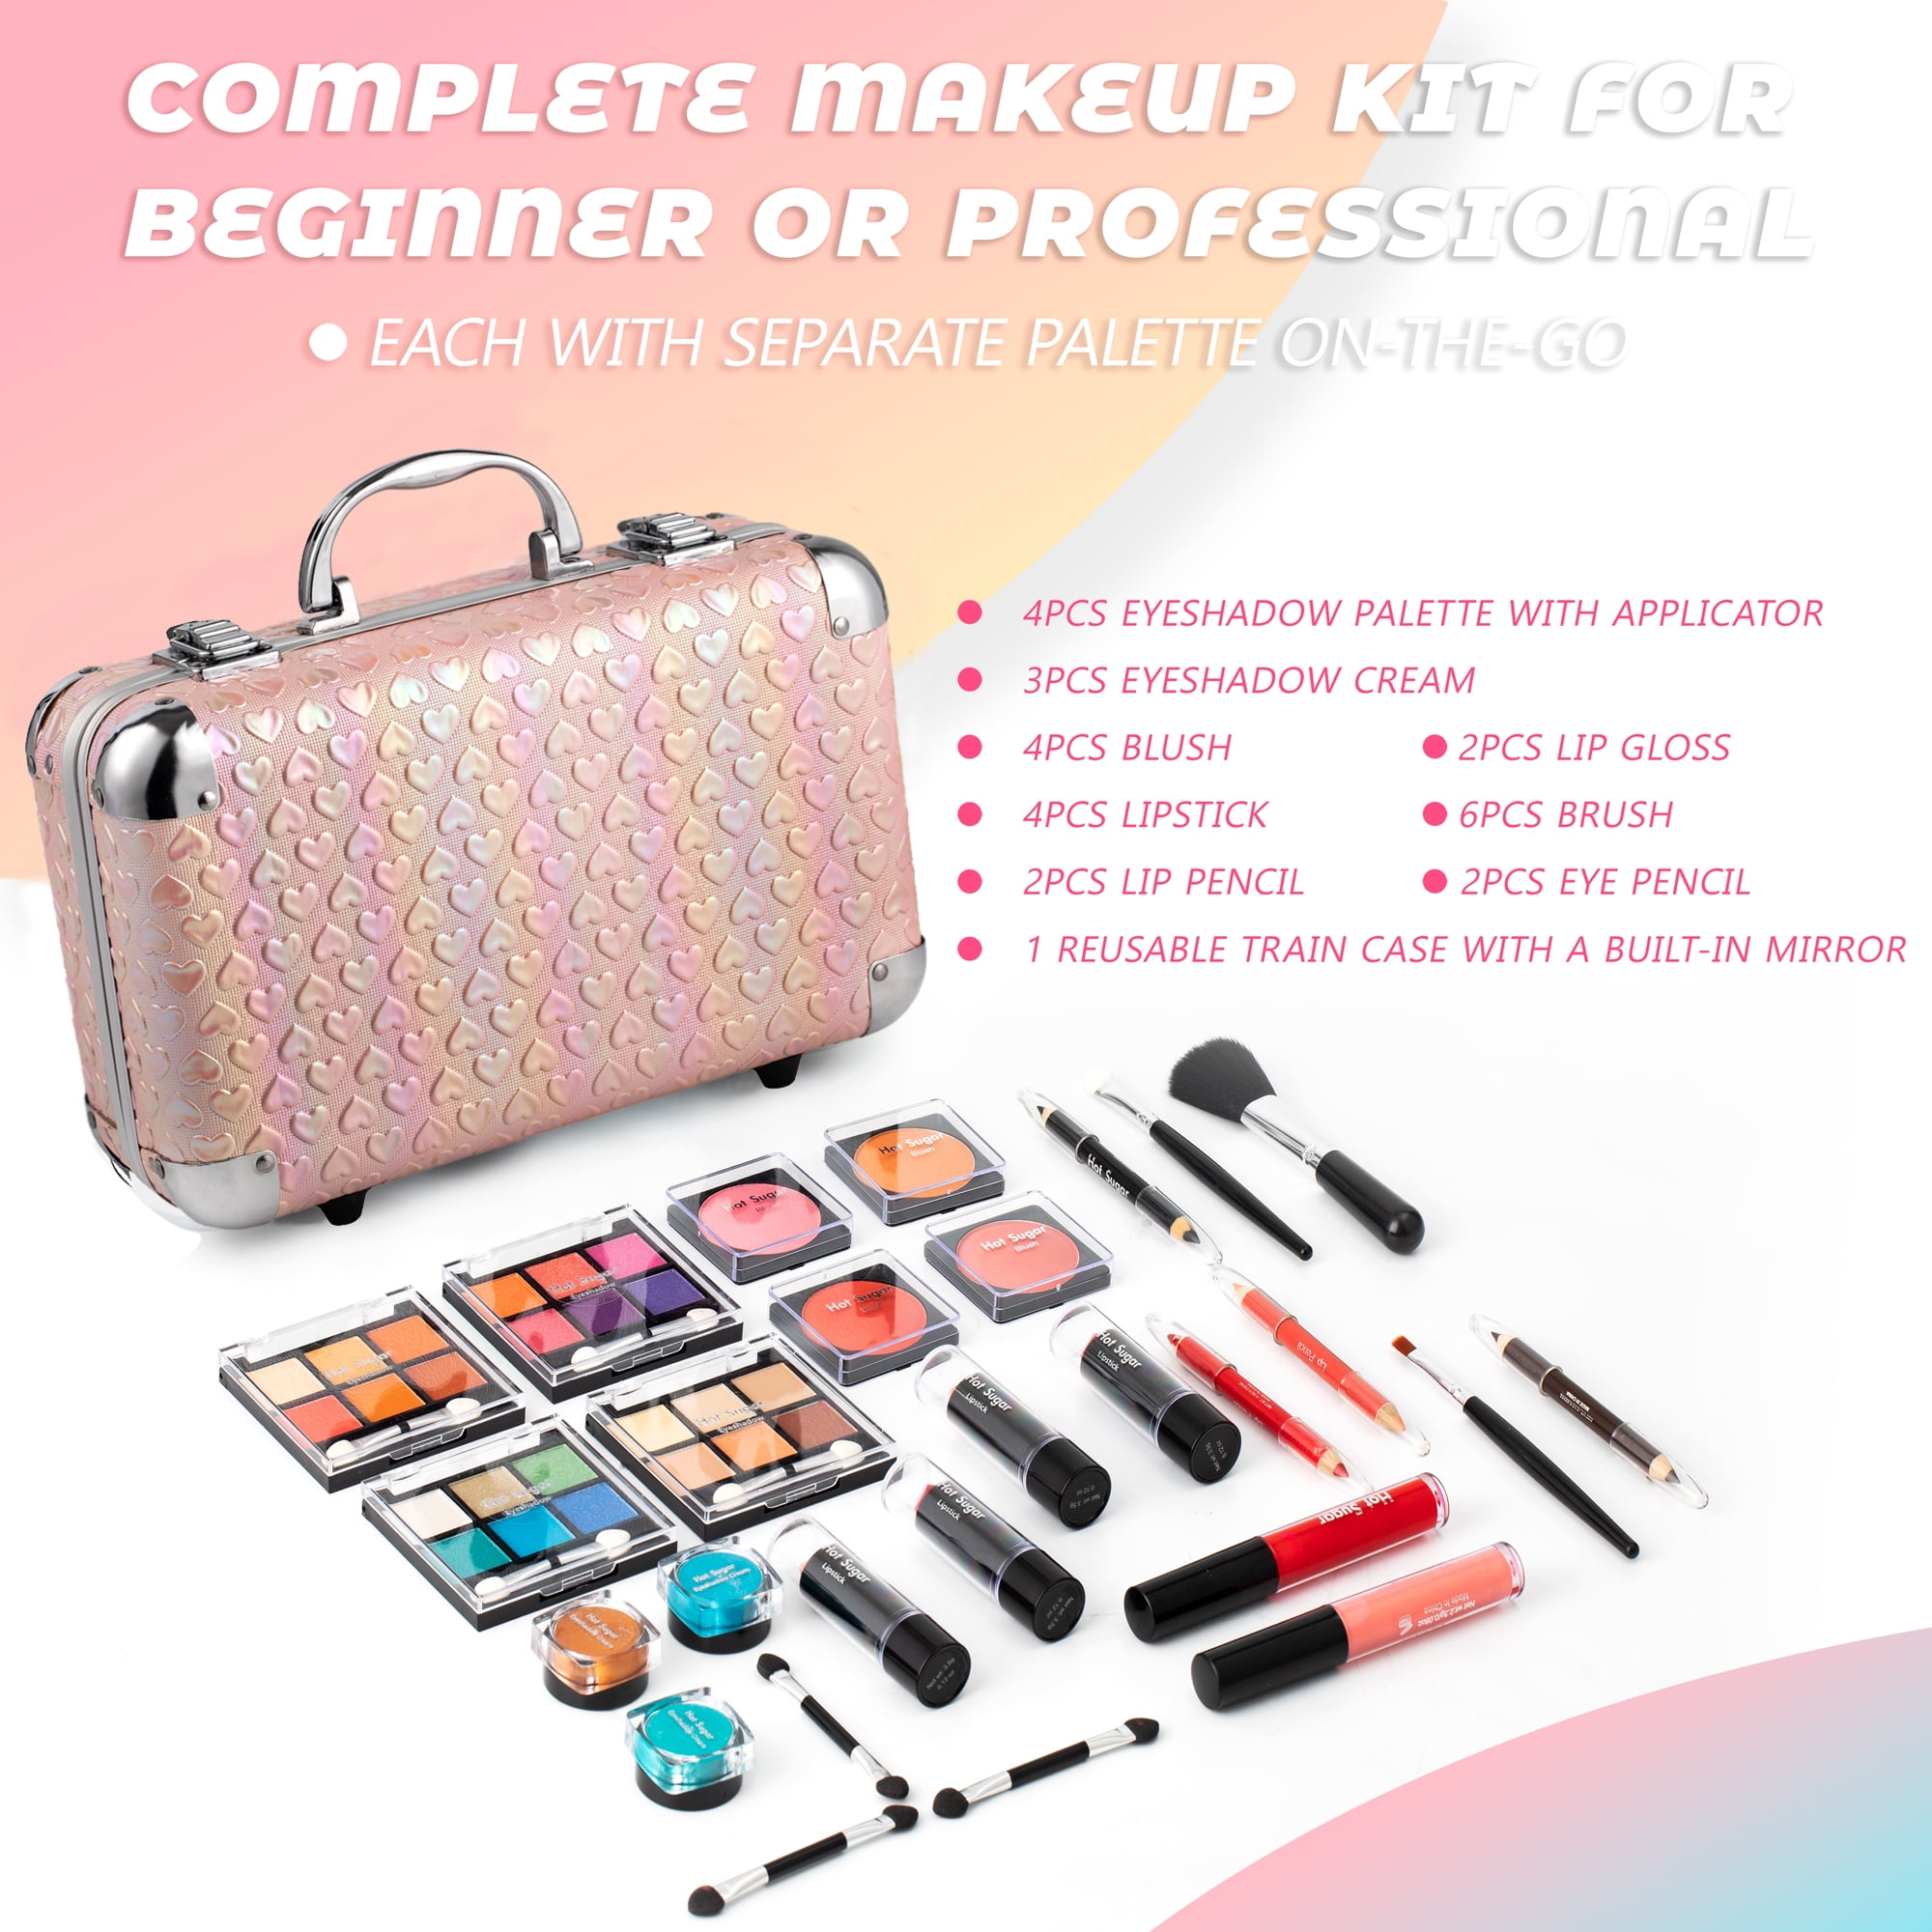 Hot Sugar Makeup Kit for Girls 10-12, All-in-One Kids Makeup Set for Teens,  Starter Cosmetic Set for Women with Essential Products - Includes Tools,  Brushes, Eyeshadows, and More! (Mermaid) 